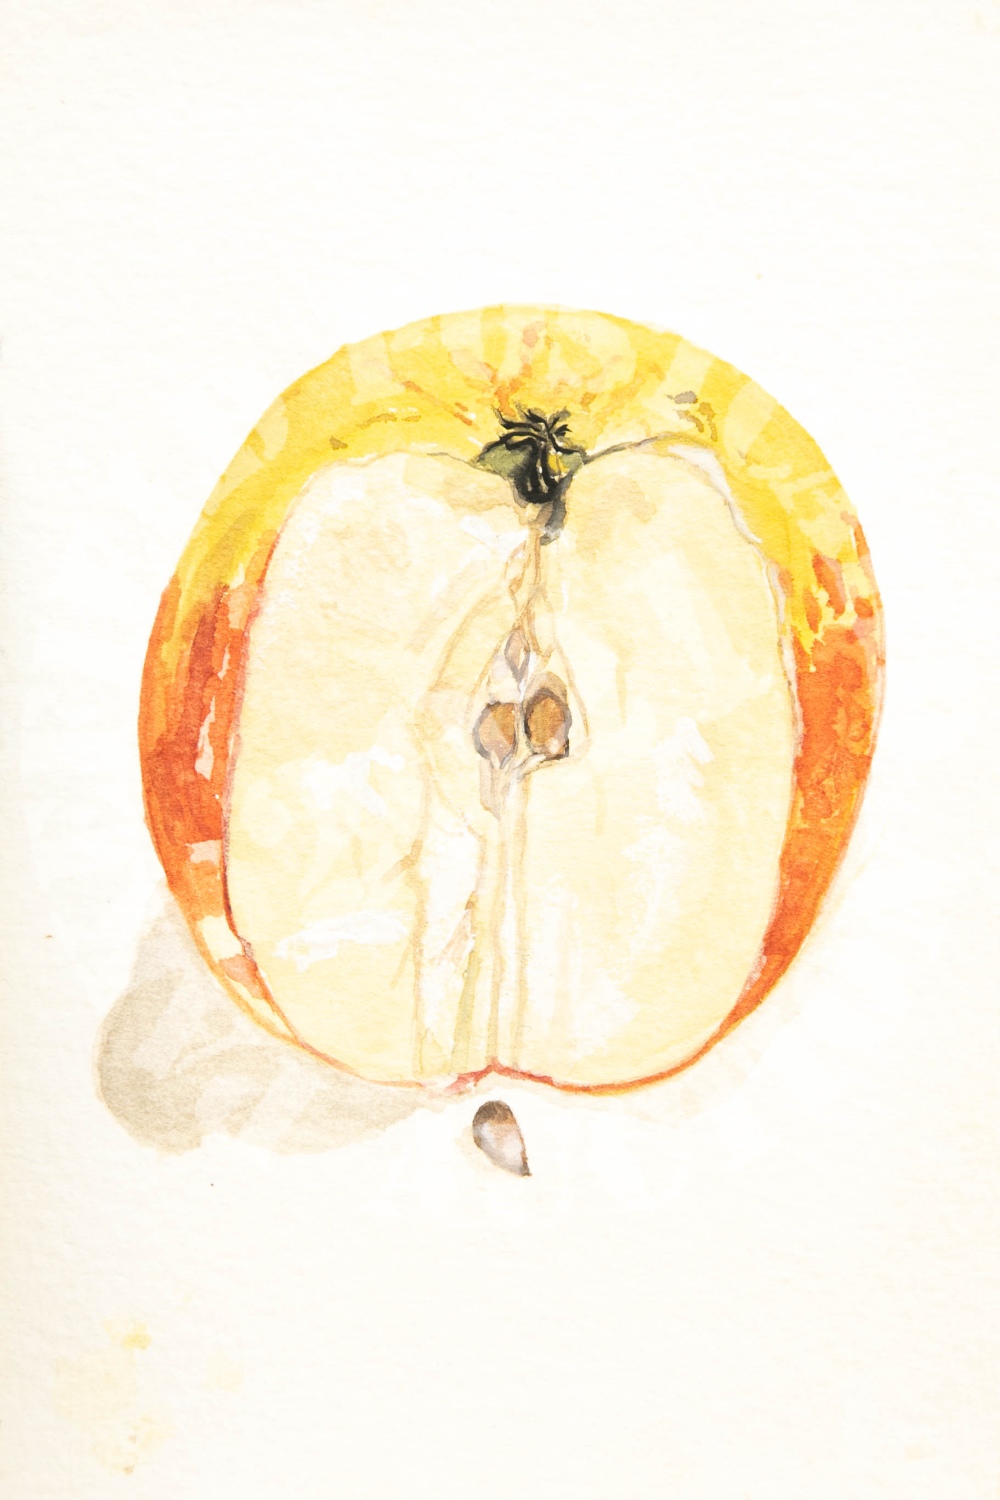 Appleseed - watercolour.